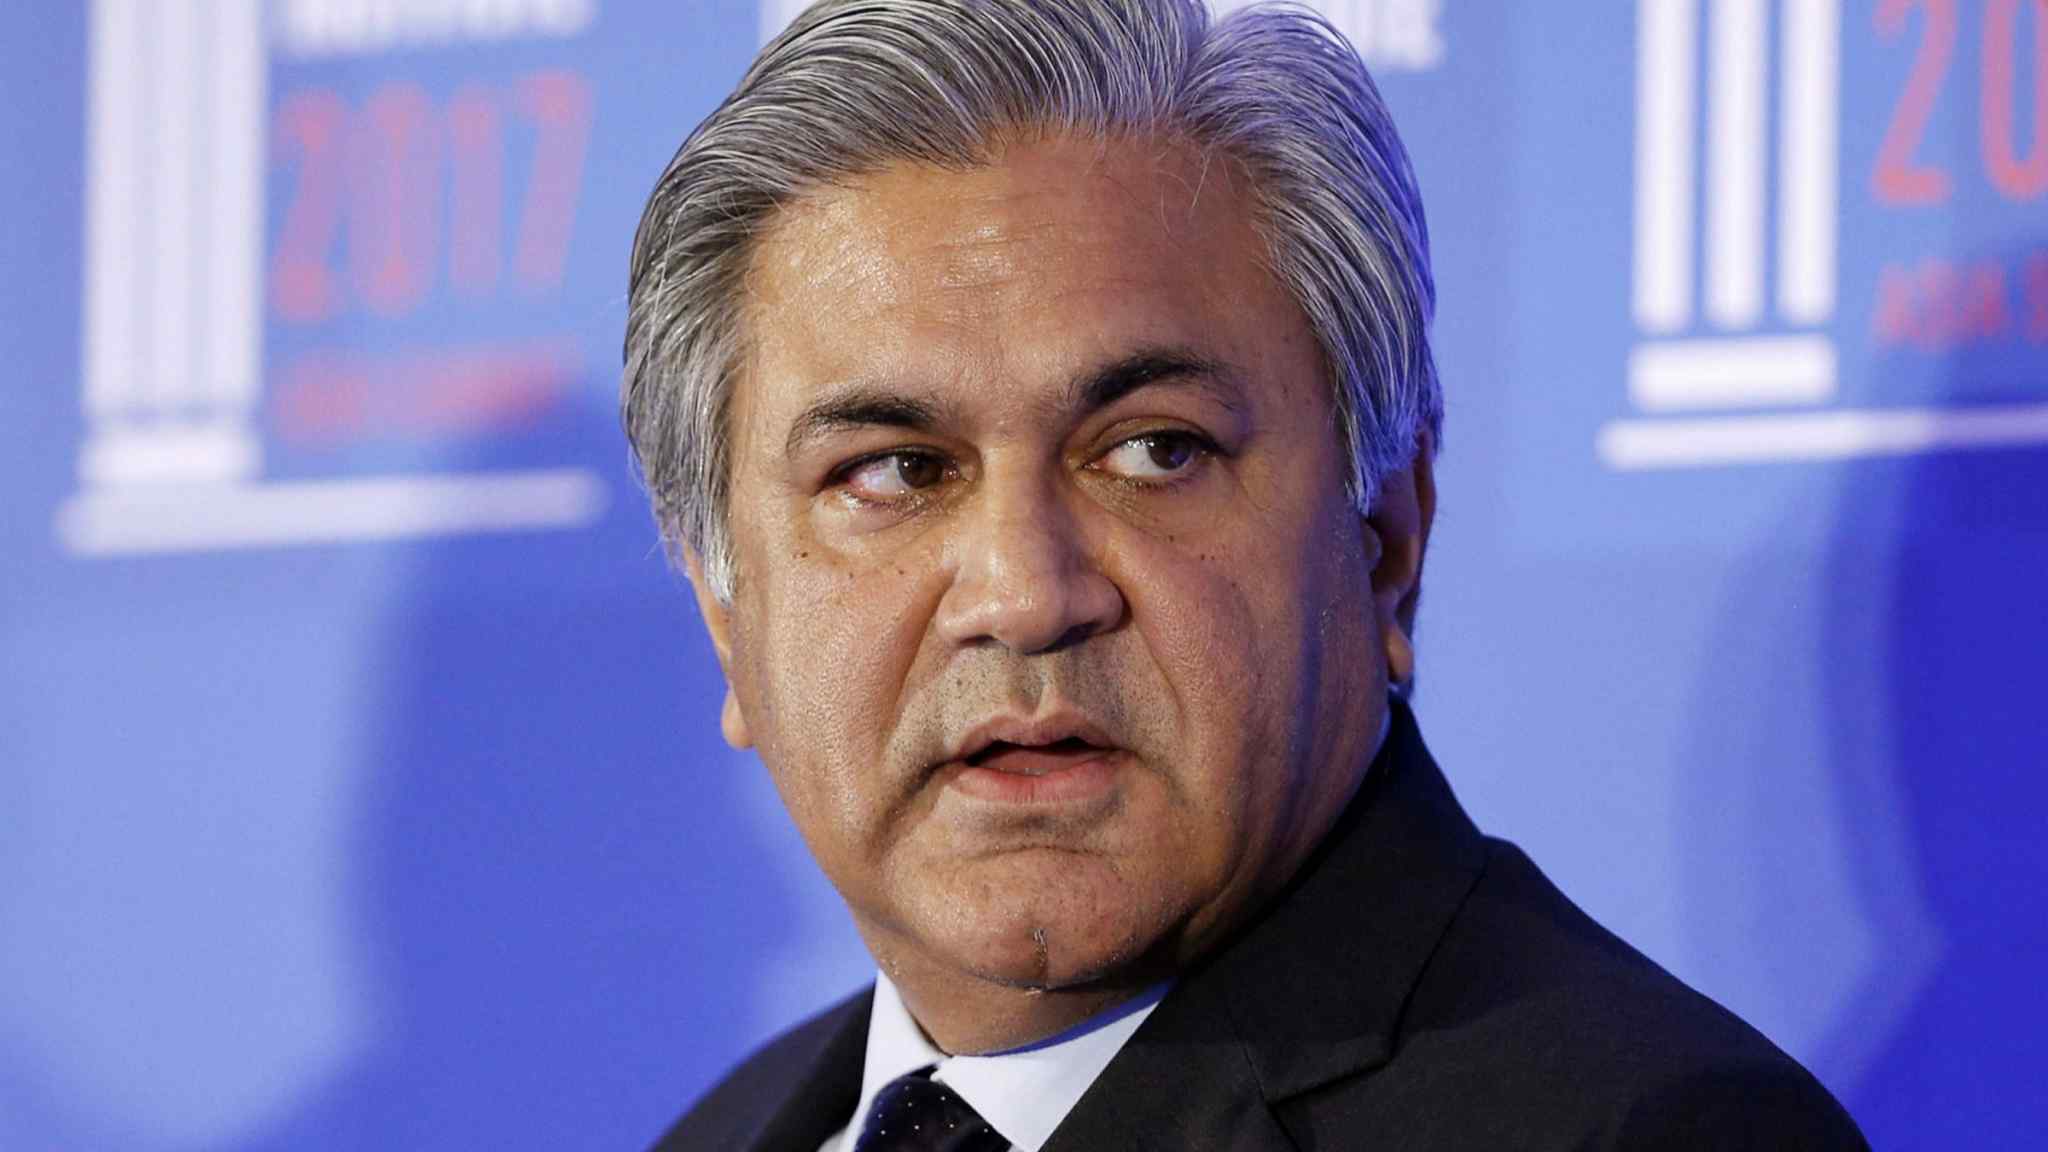 Founder of failed private equity firm Abraaj fined for misleading investors